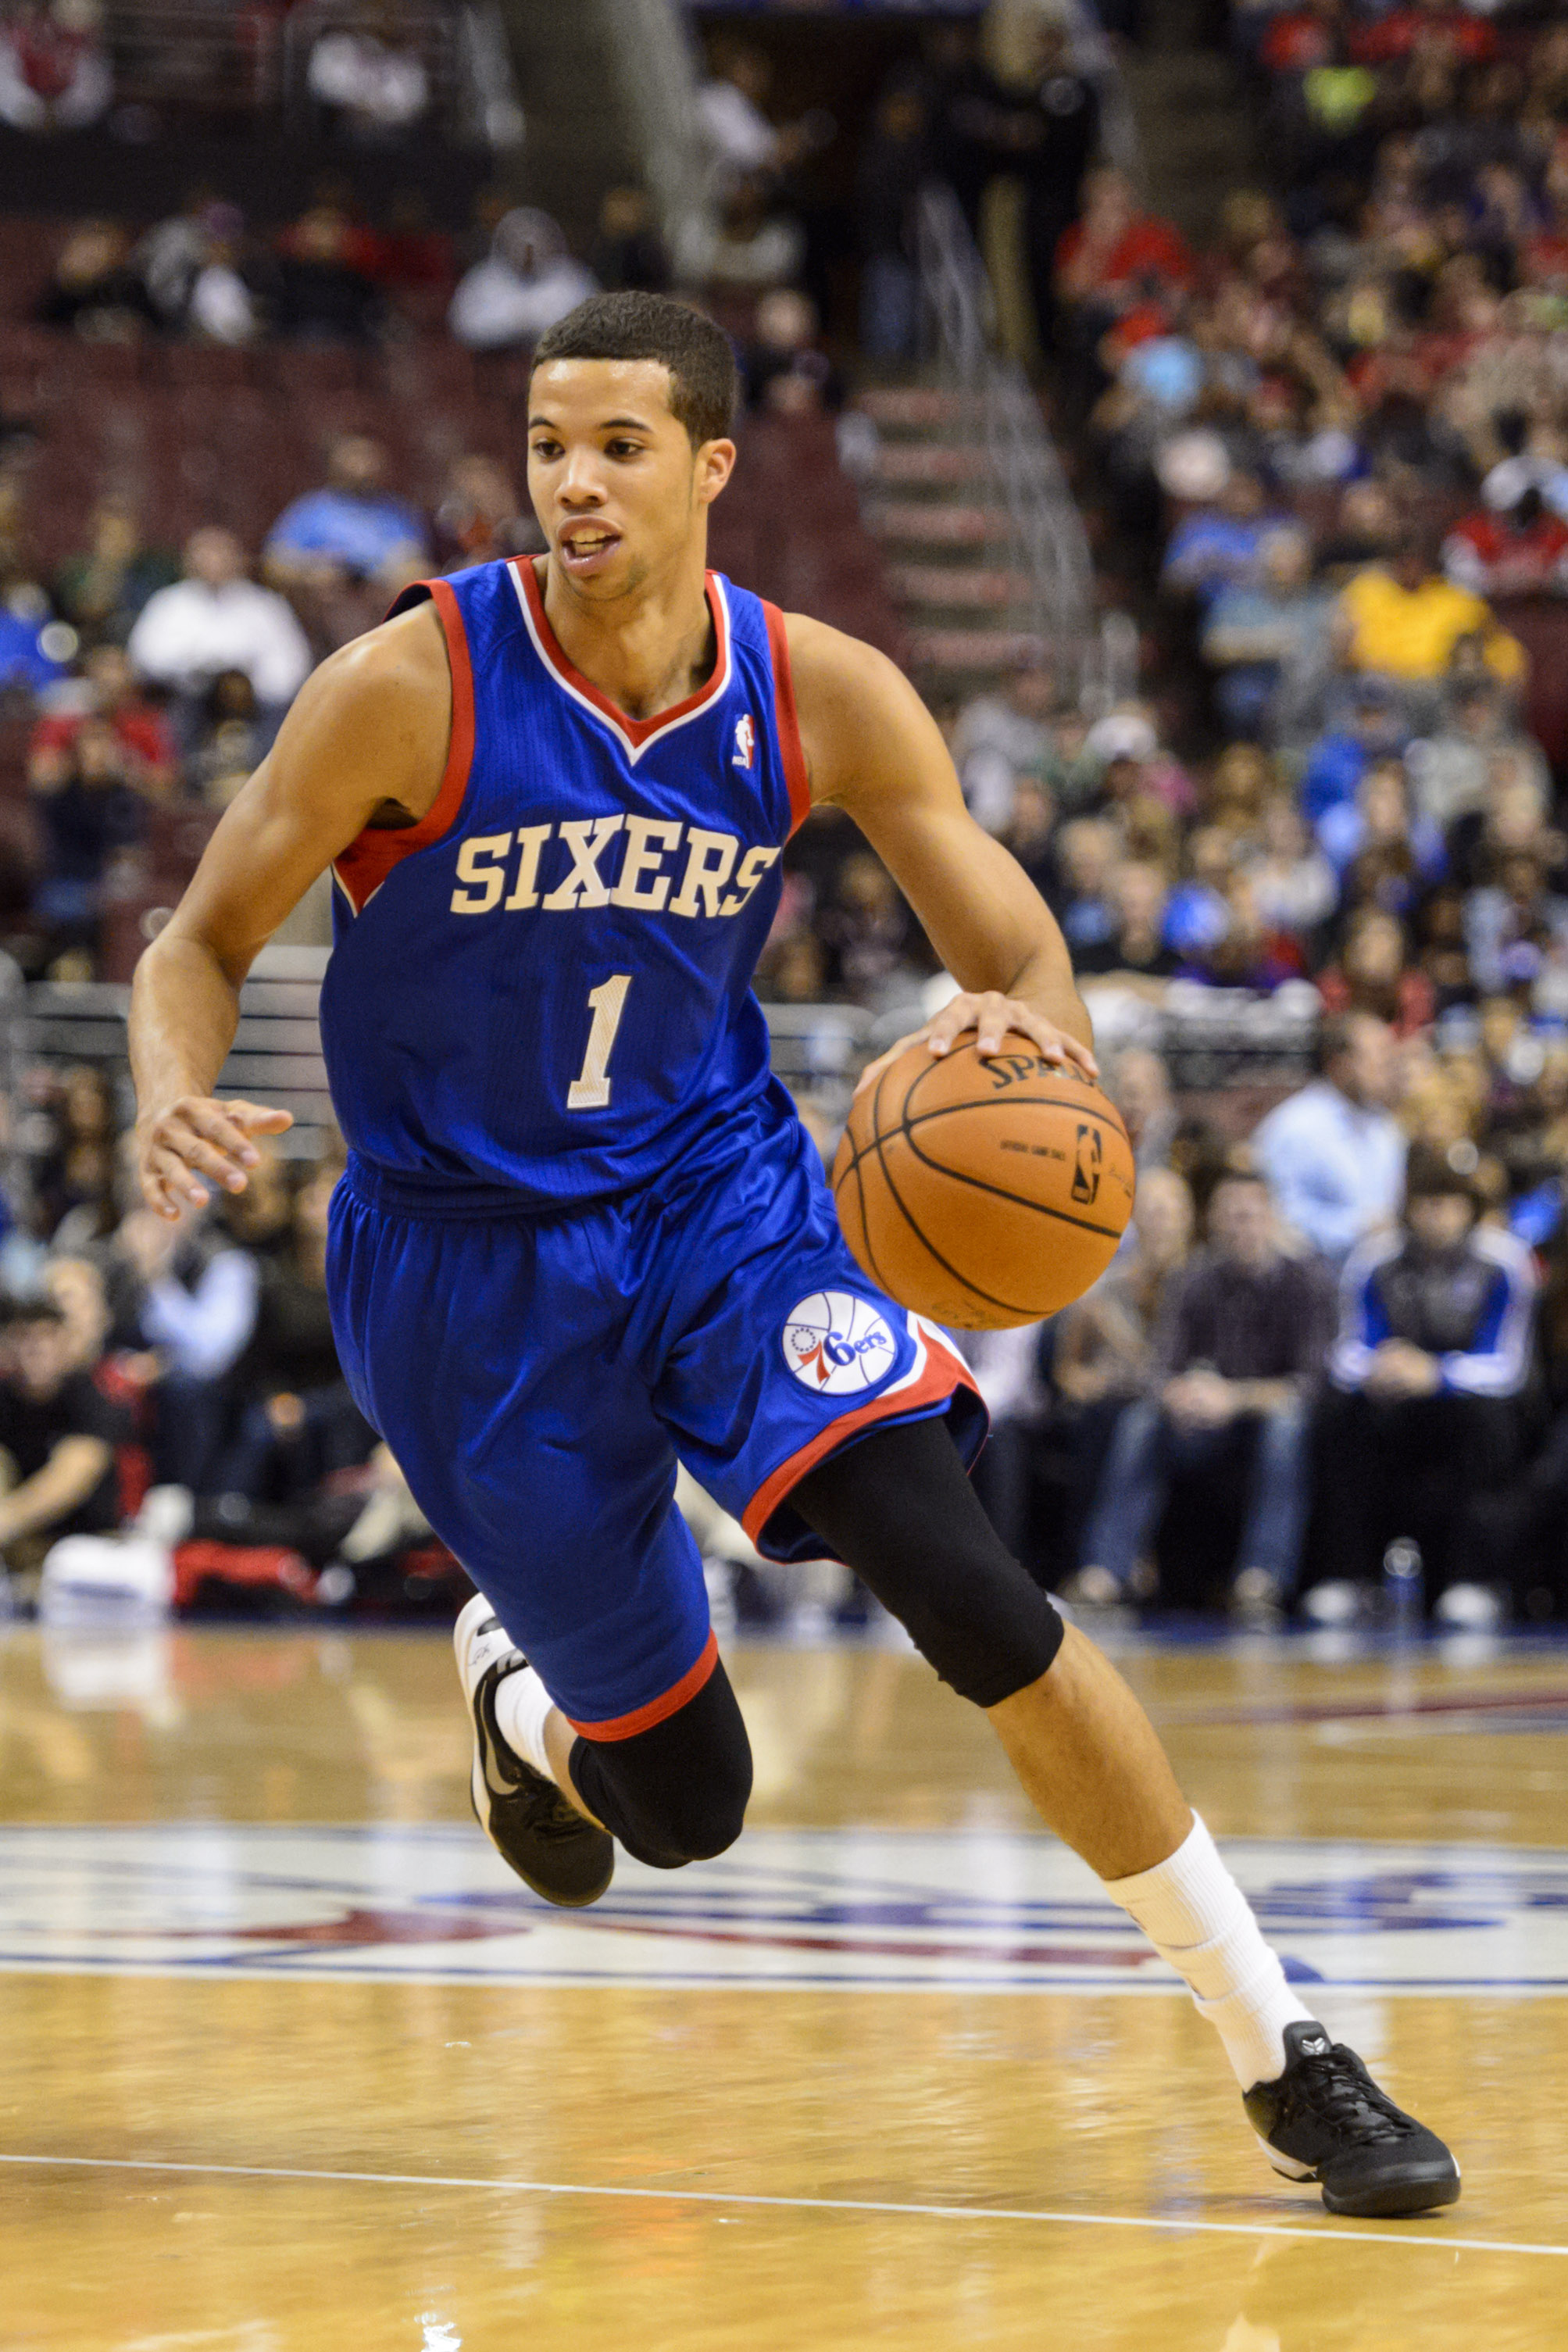 Sixers Michael Carter-Williams Leading NBA Rookie of the Year Race.